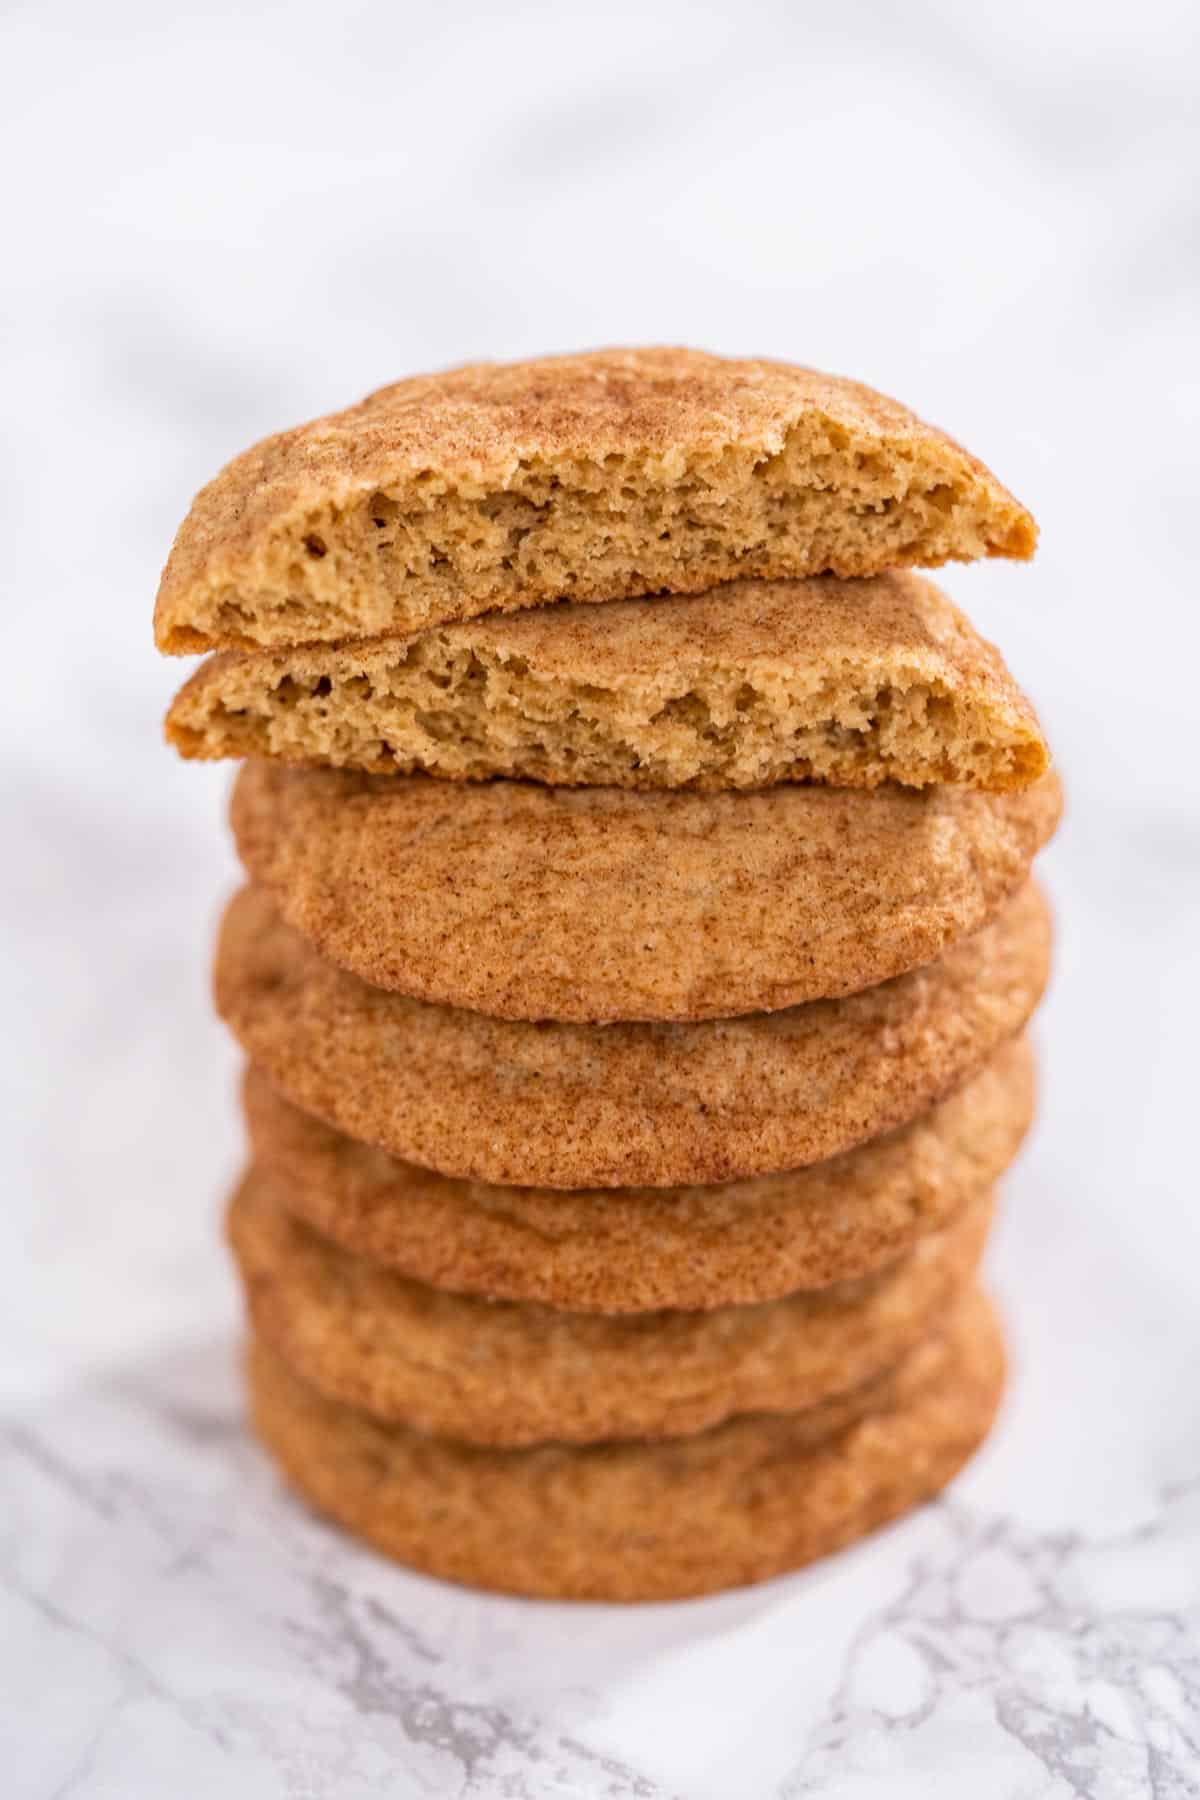 A stack of snickerdoodle cookies with the top cookie split in half to show texture.